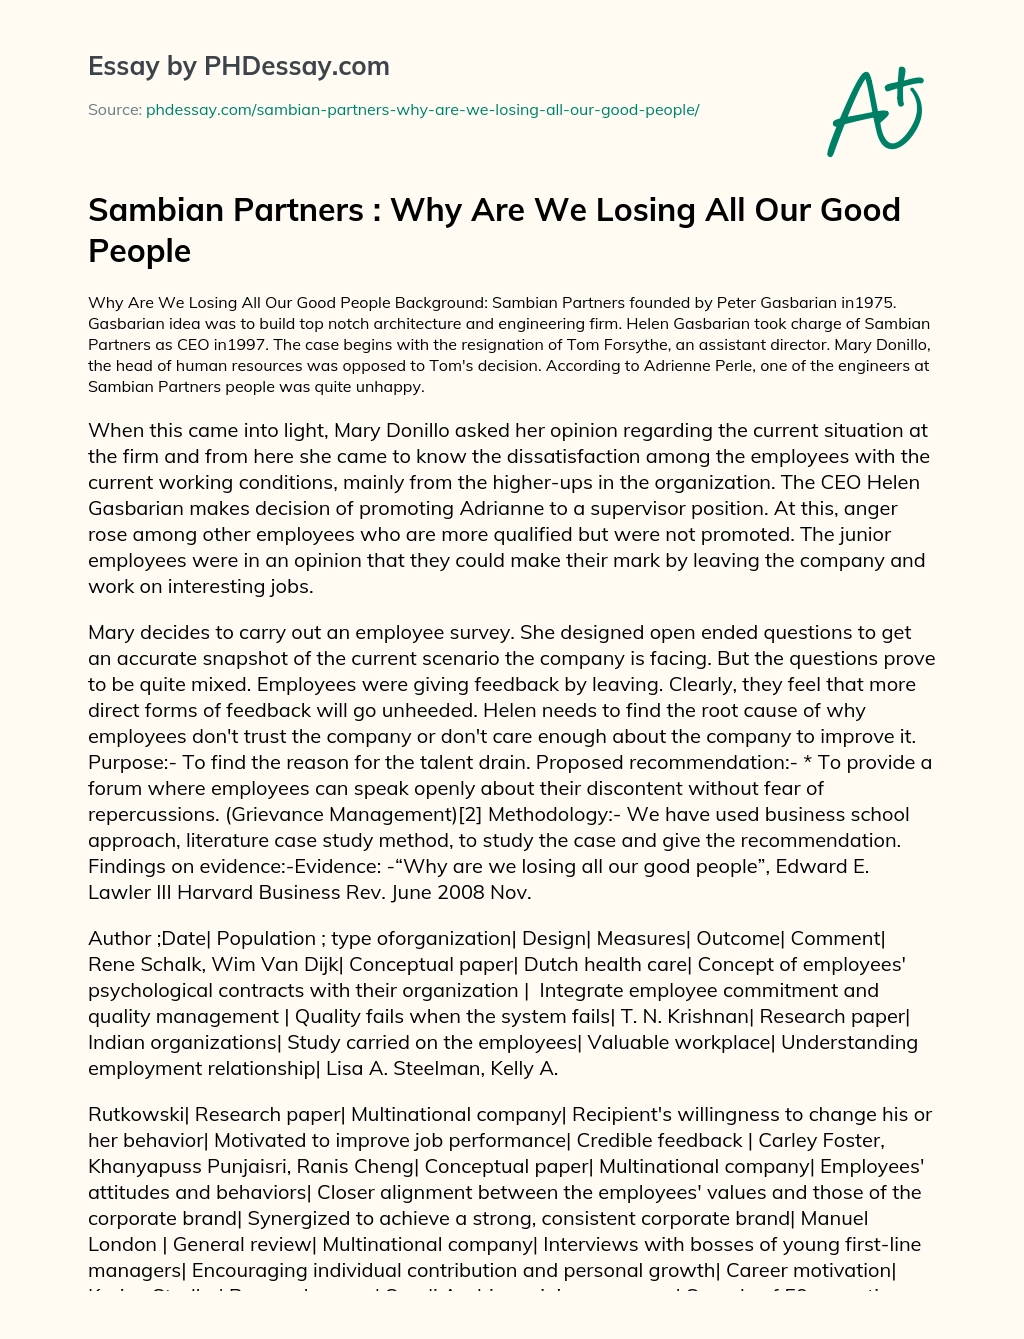 Sambian Partners : Why Are We Losing All Our Good People essay